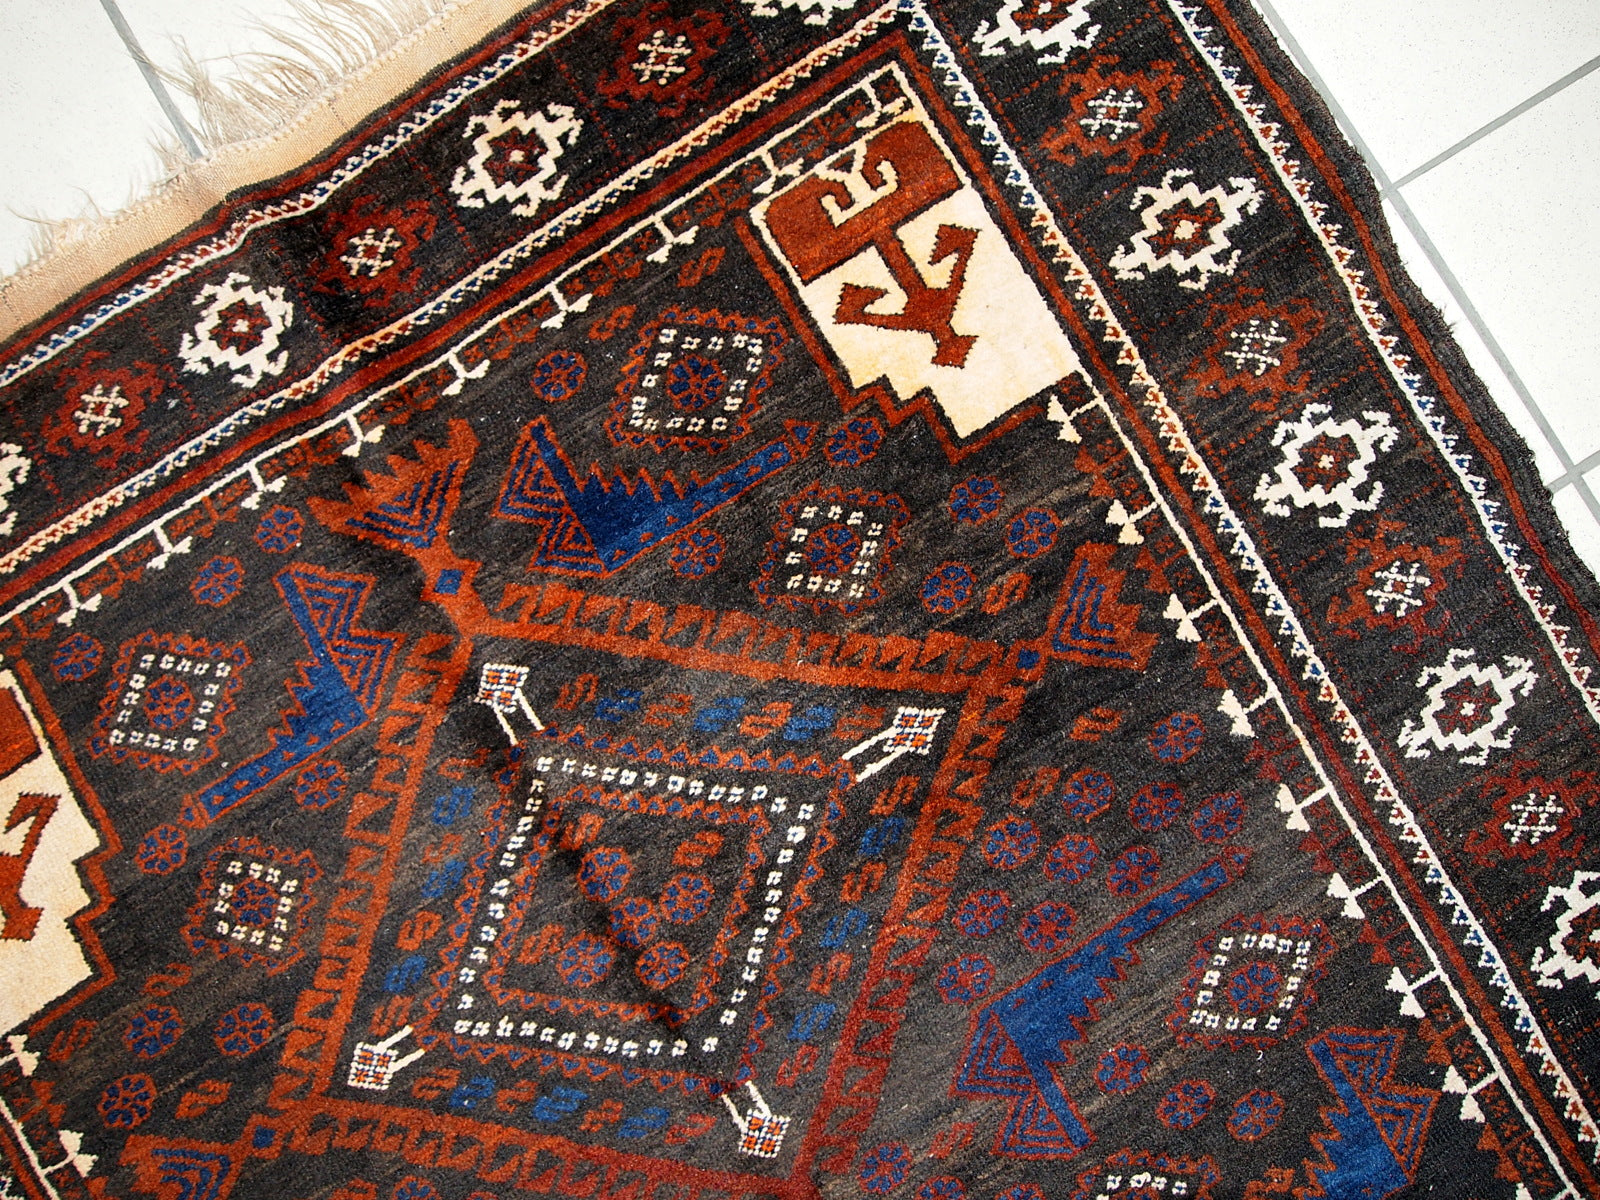 Detailed view of bright blue patterns and designs on the Afghan Baluch rug.